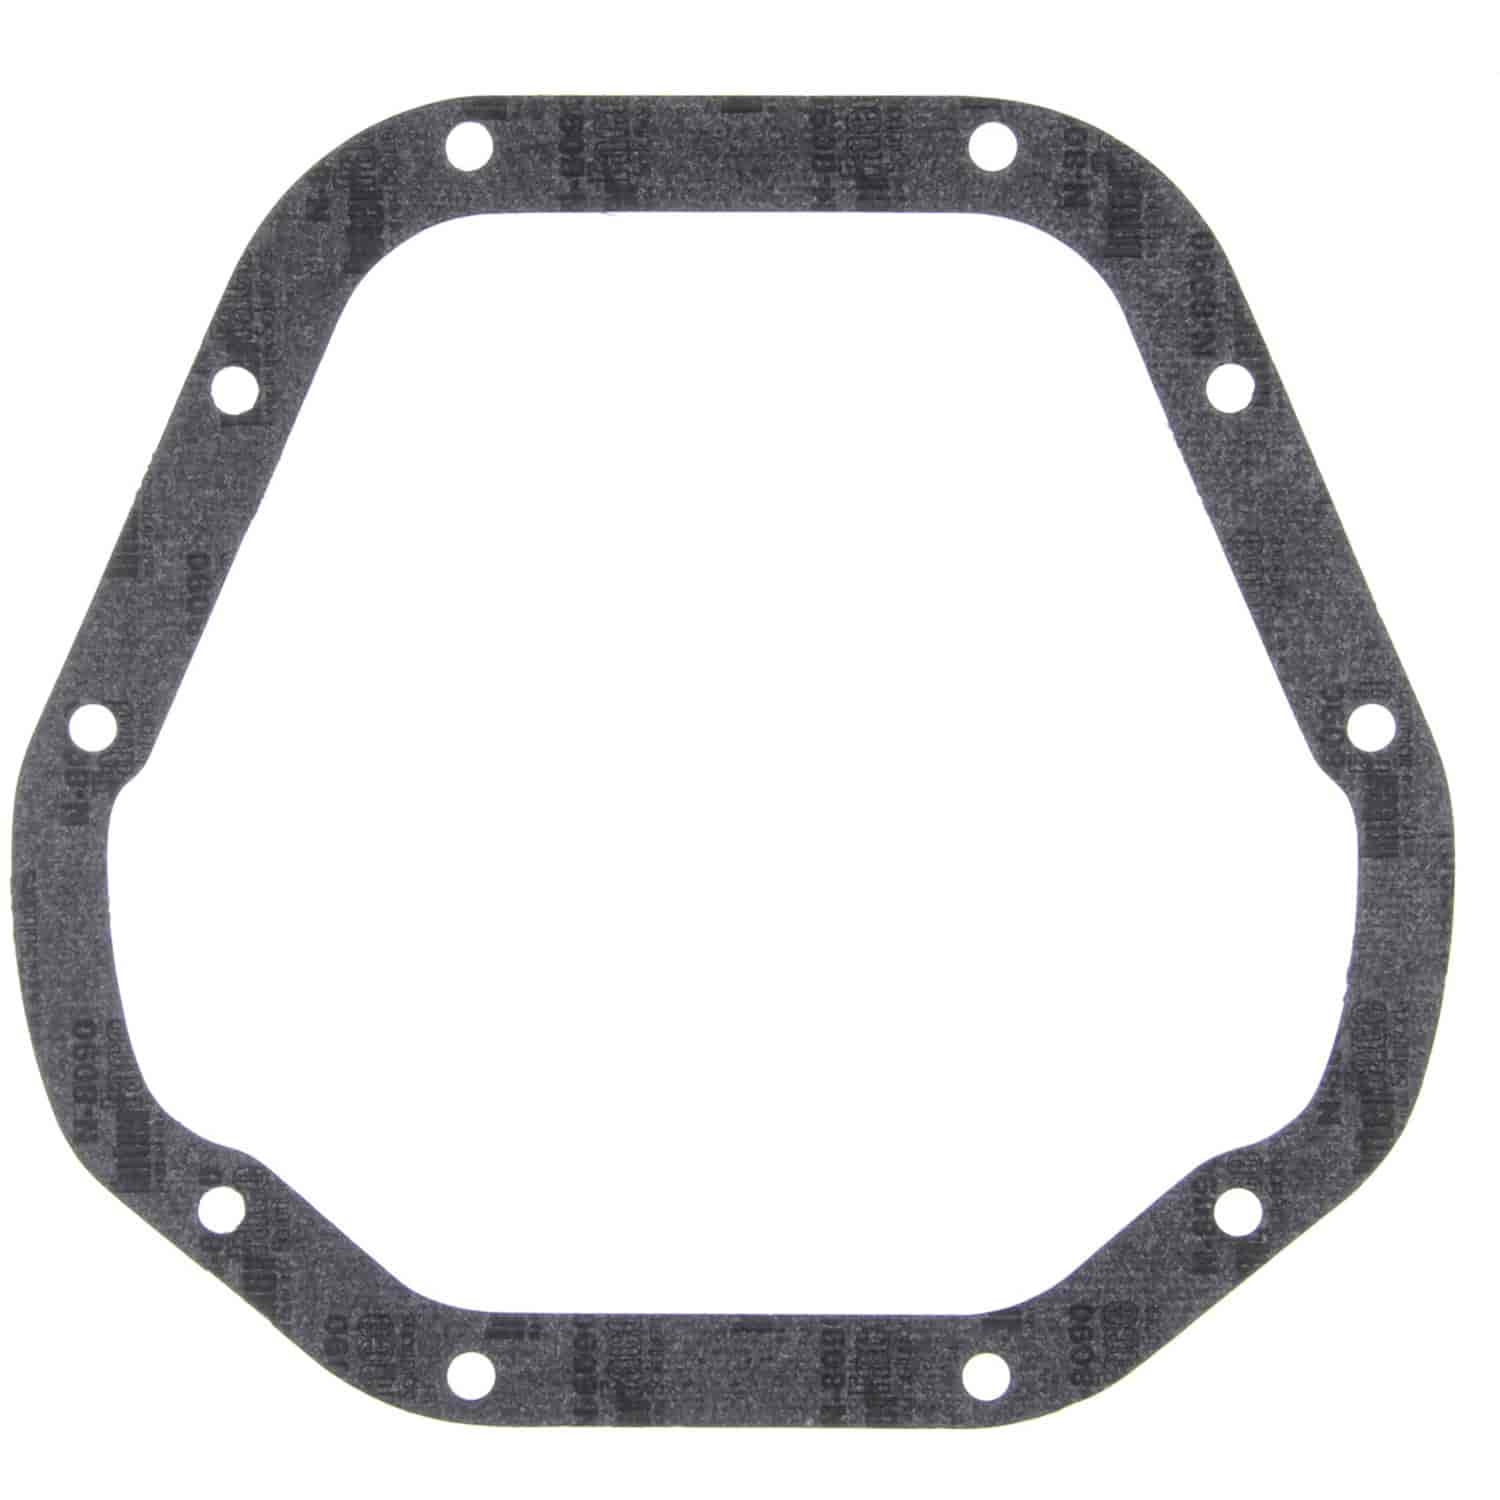 Axle Housing Cover Gasket 1959-1998 Chrysler, Dodge, Plymouth with Dana 60/70